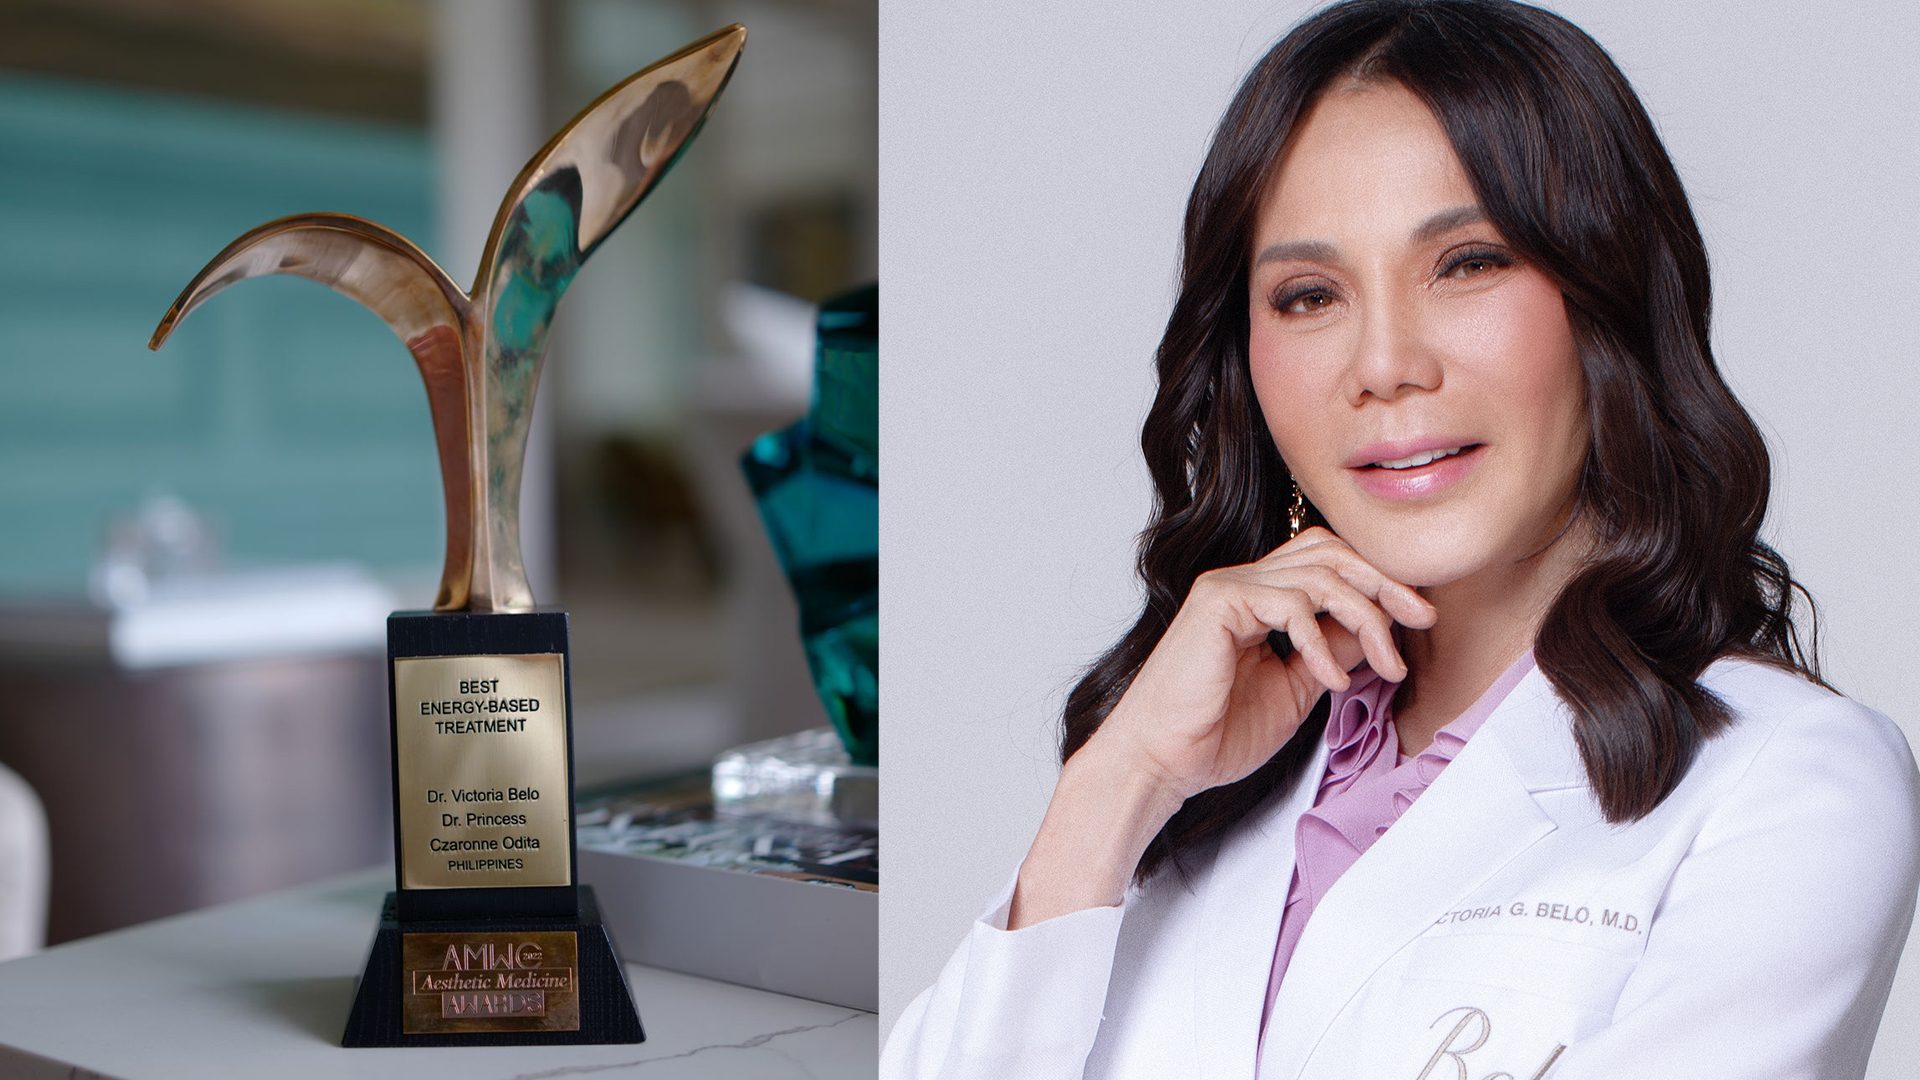 Belo Medical Group’s Vivace awarded best results for energy-based treatment